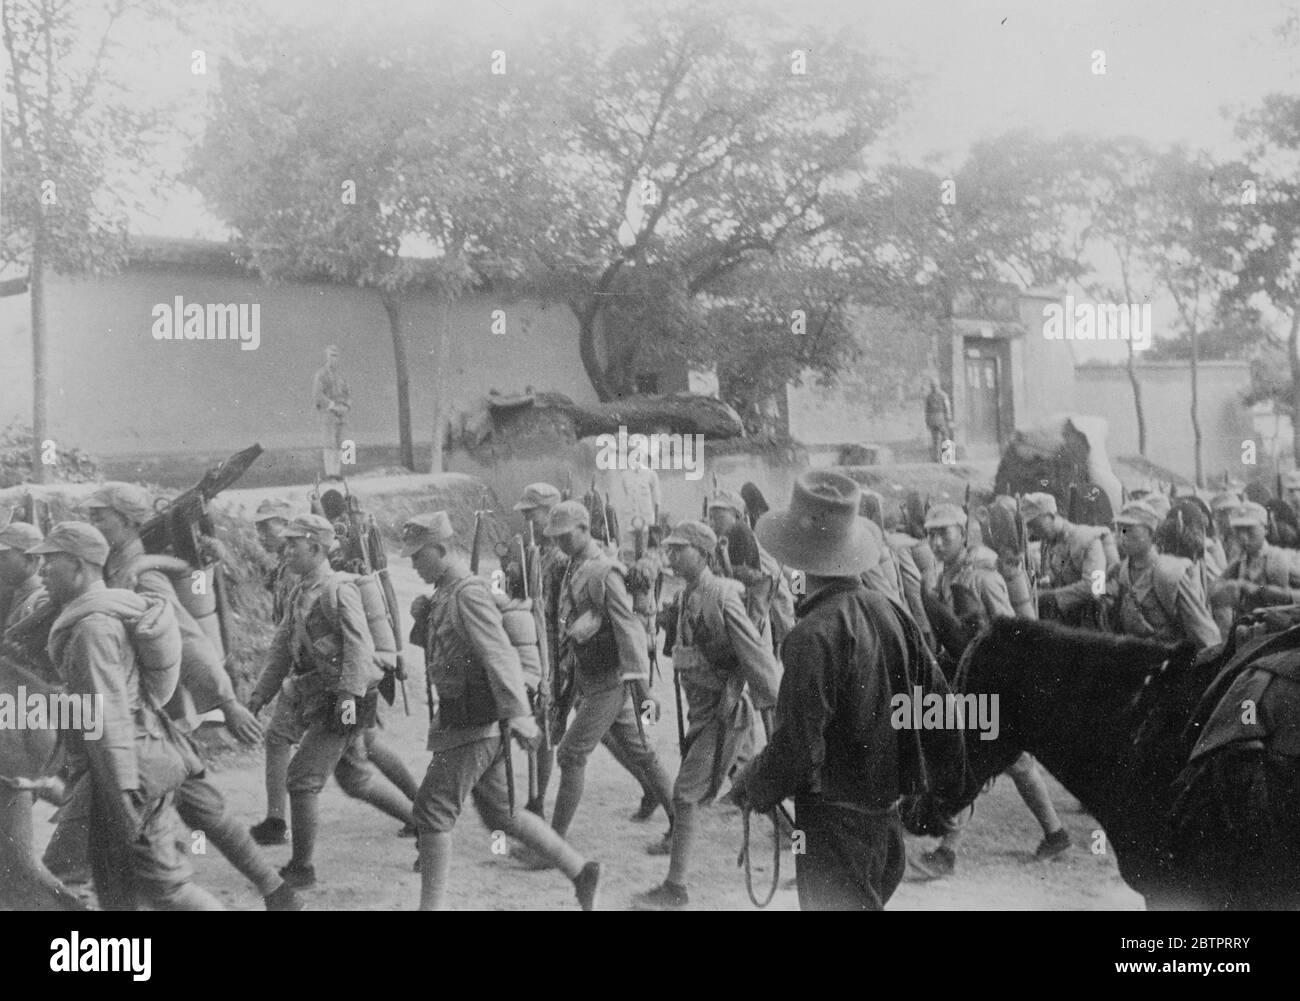 The retreat from Shanghai. Chinese troops march to defend capital. This picture, just received in London, shows Chinese troops, rifles and blanket slung across their shoulders, marching through a village to the North of Shanghai, on their way to help in the defence of Nanking, the capital, which is now threatened by the Japanese. These troops were forced to retreat from Shanghai and hurried nor to reinforce Nanking's defenders 21 November 1937 Stock Photo